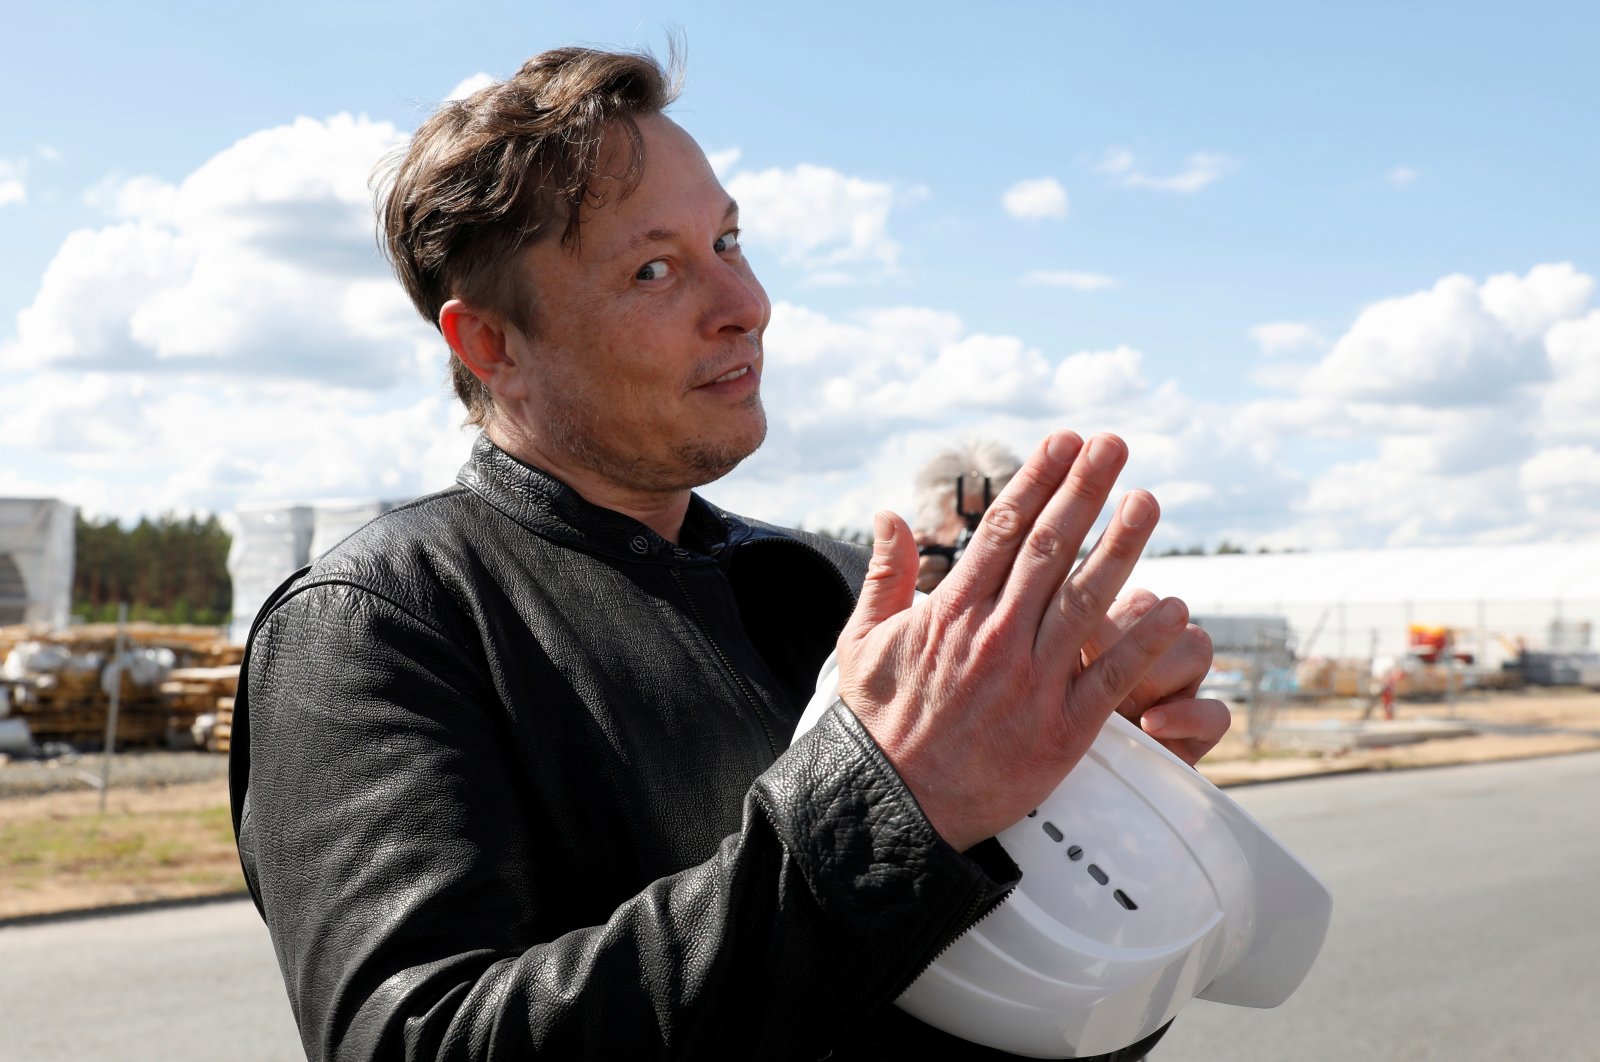 SpaceX founder and Tesla CEO Elon Musk visits the construction site of Tesla's gigafactory in Gruenheide, near Berlin, Germany, May 17, 2021. (Reuters Photo)